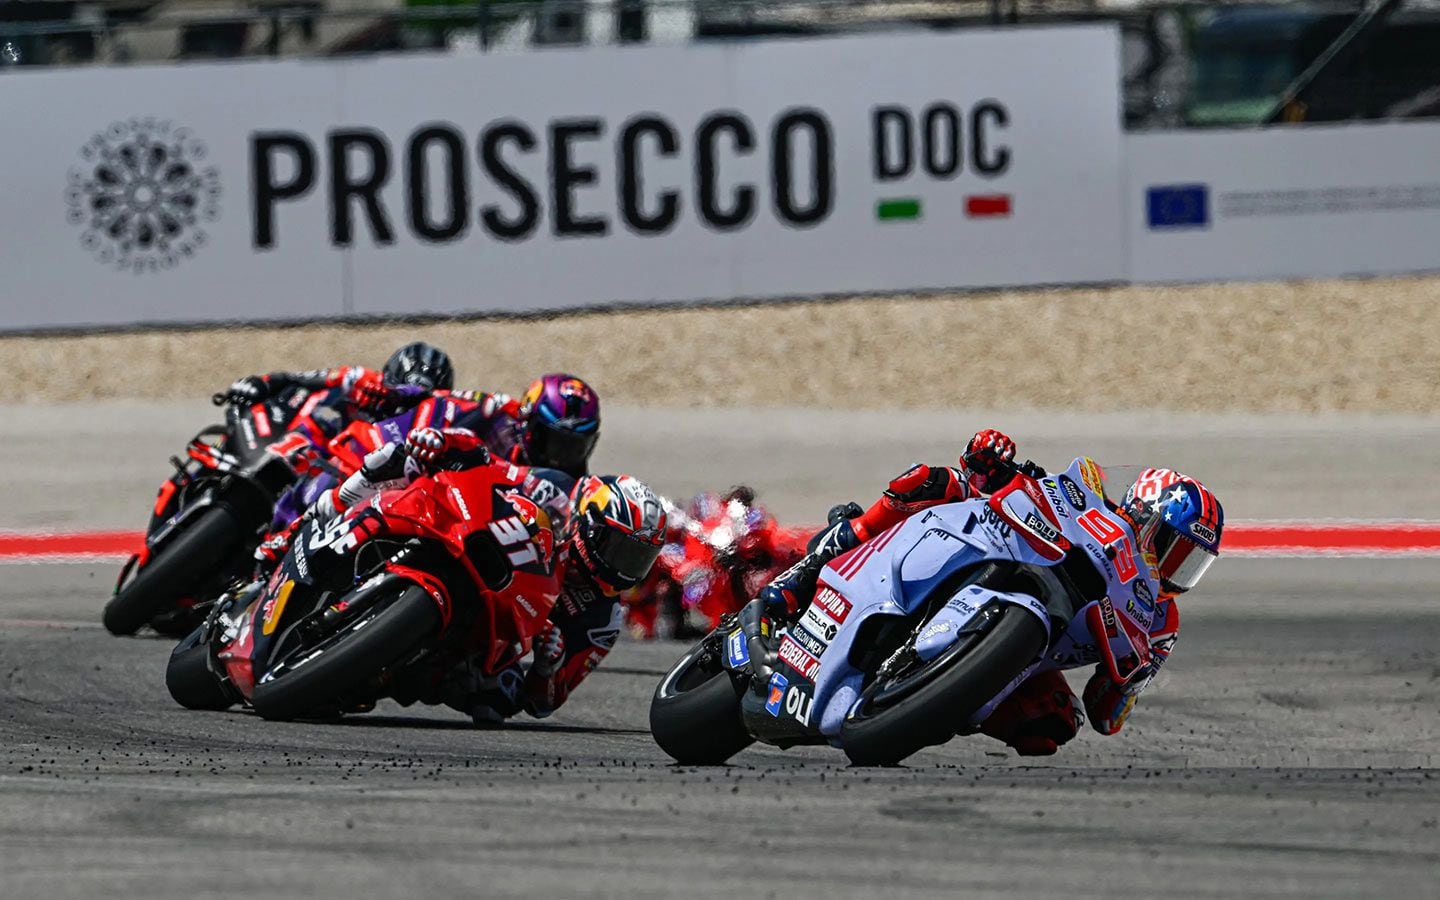 Marc Márquez took his turn at the front, showing that he’s not washed up or out of the fight.